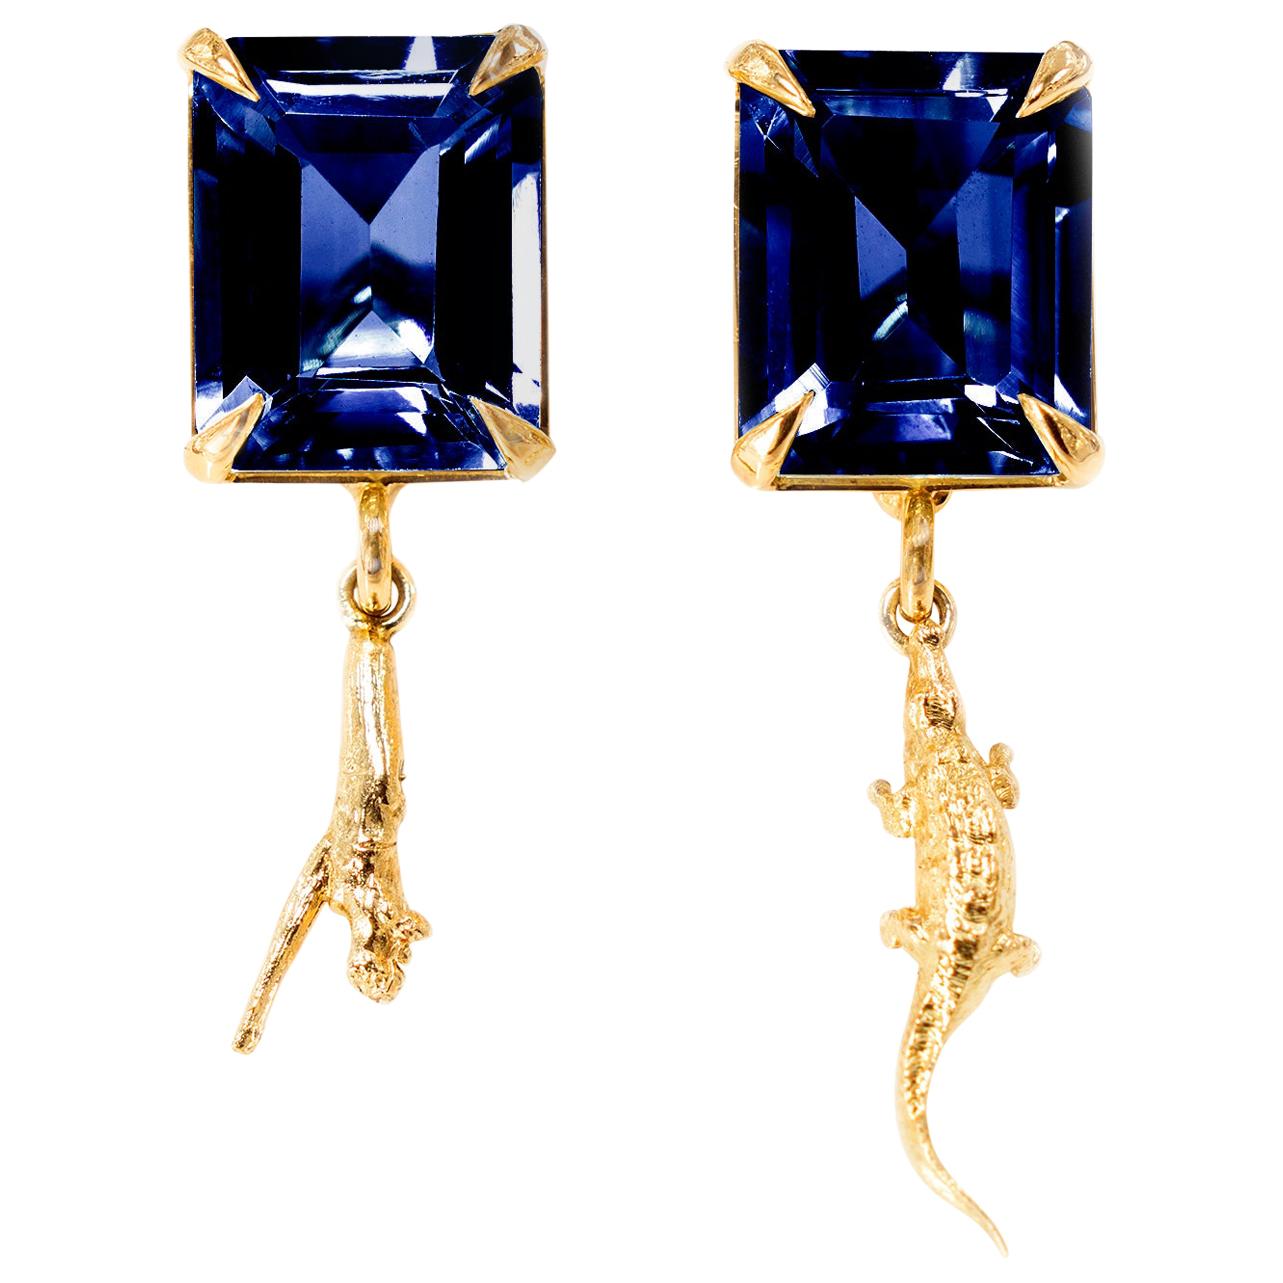 Eighteen Karat Yellow Gold Contemporary Clip-On Earrings with Sapphires